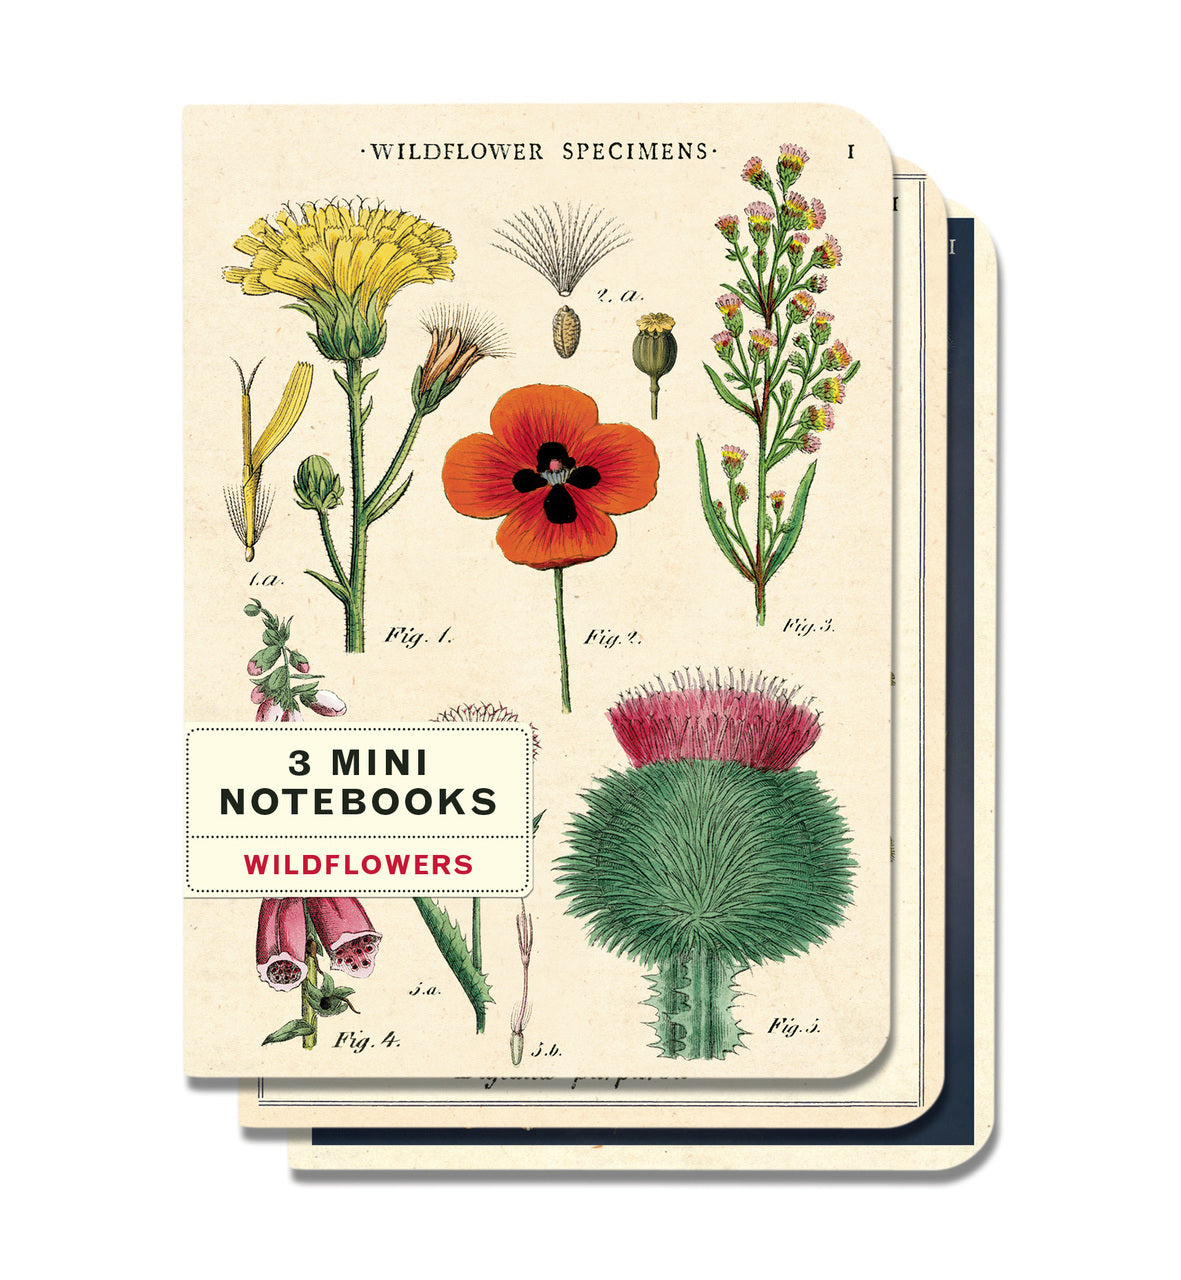 The Cavallini Wildflowers Mini Notebook Set is a new design for 2018. Set contains three notebooks with different botanical images on the covers. 